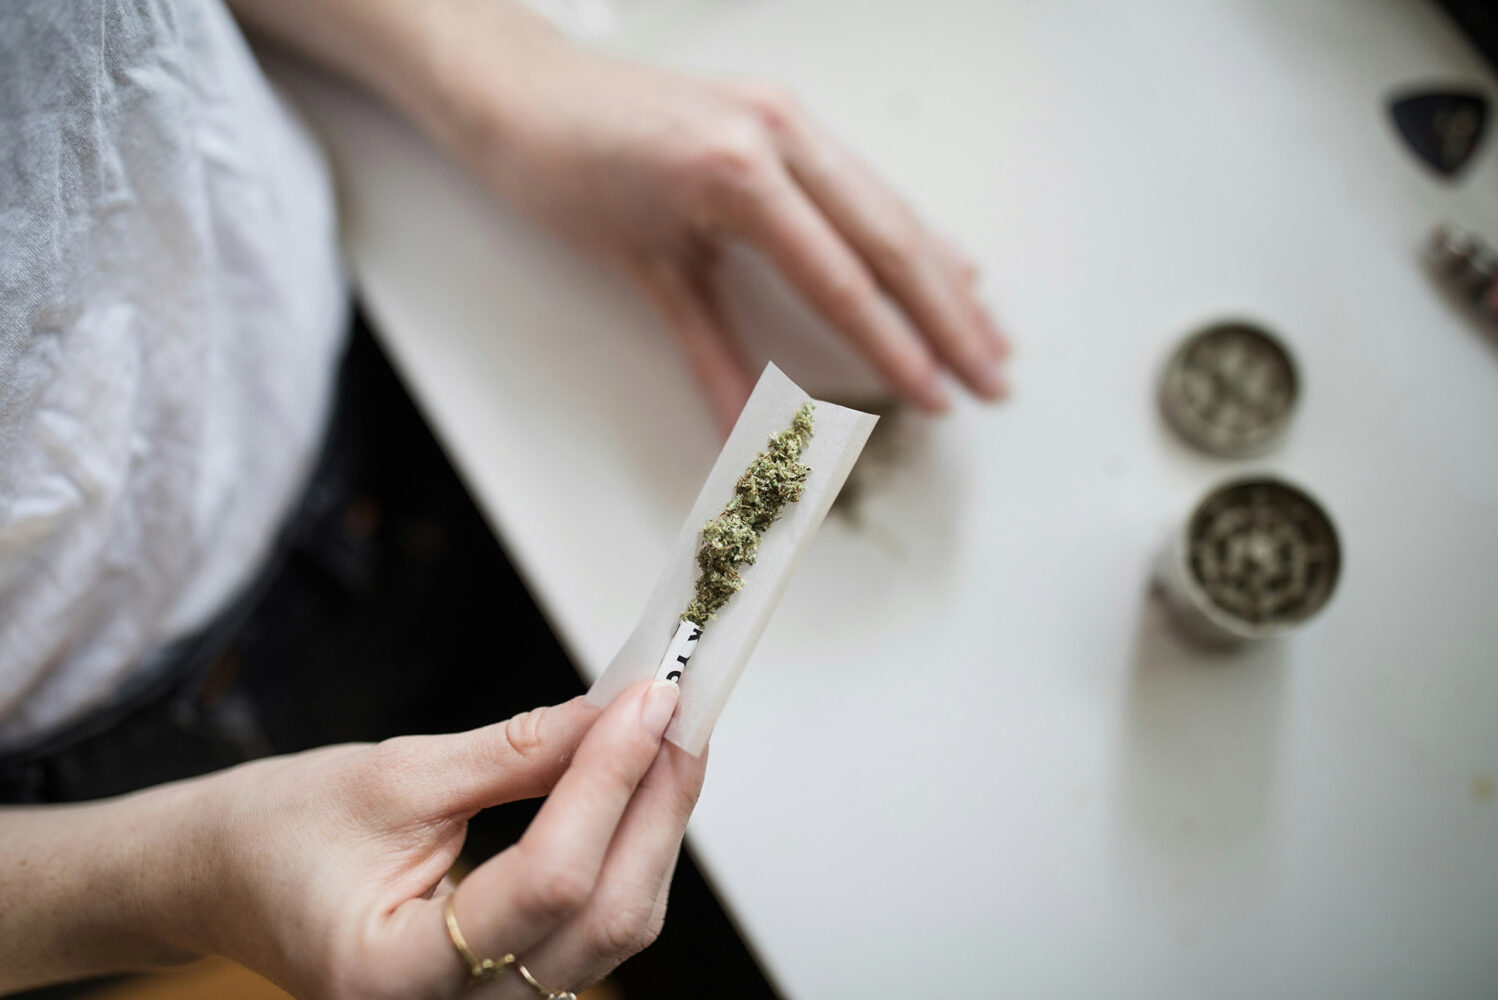 Photo: A stock image of an individual rolling up a joint.